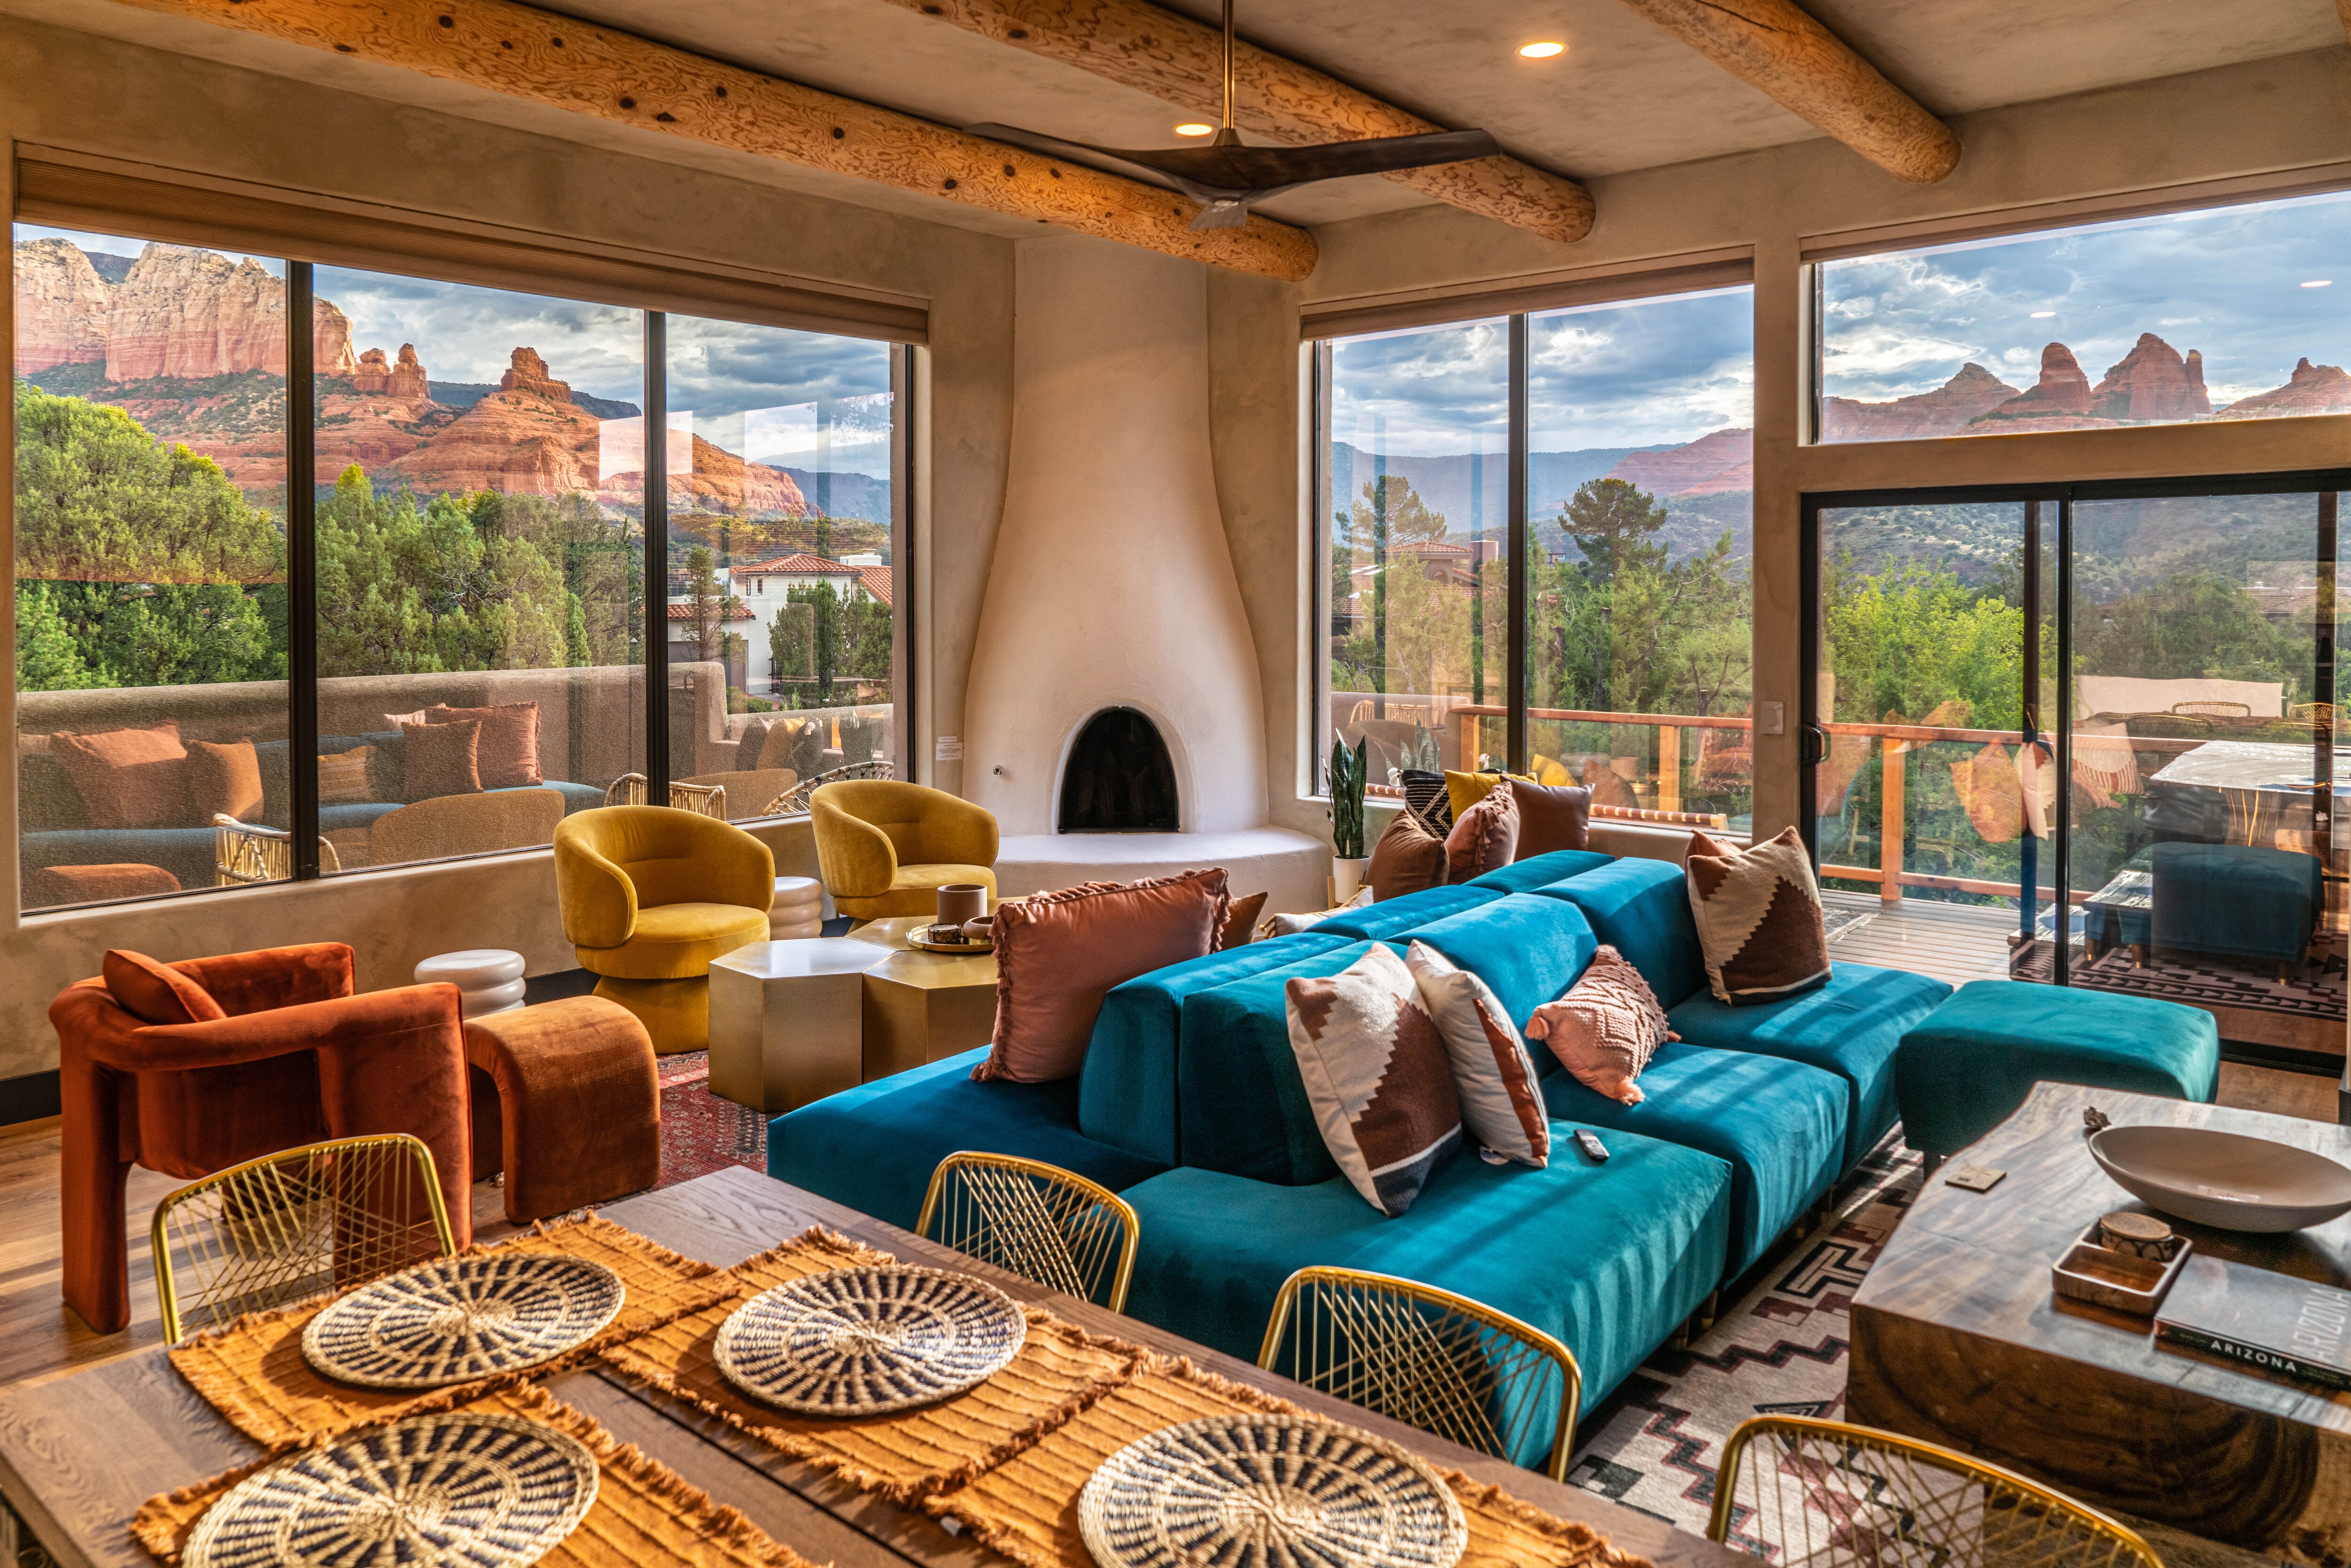 Plenty of natural light and stunning red rock views from the windows and glass doors leading to the patio